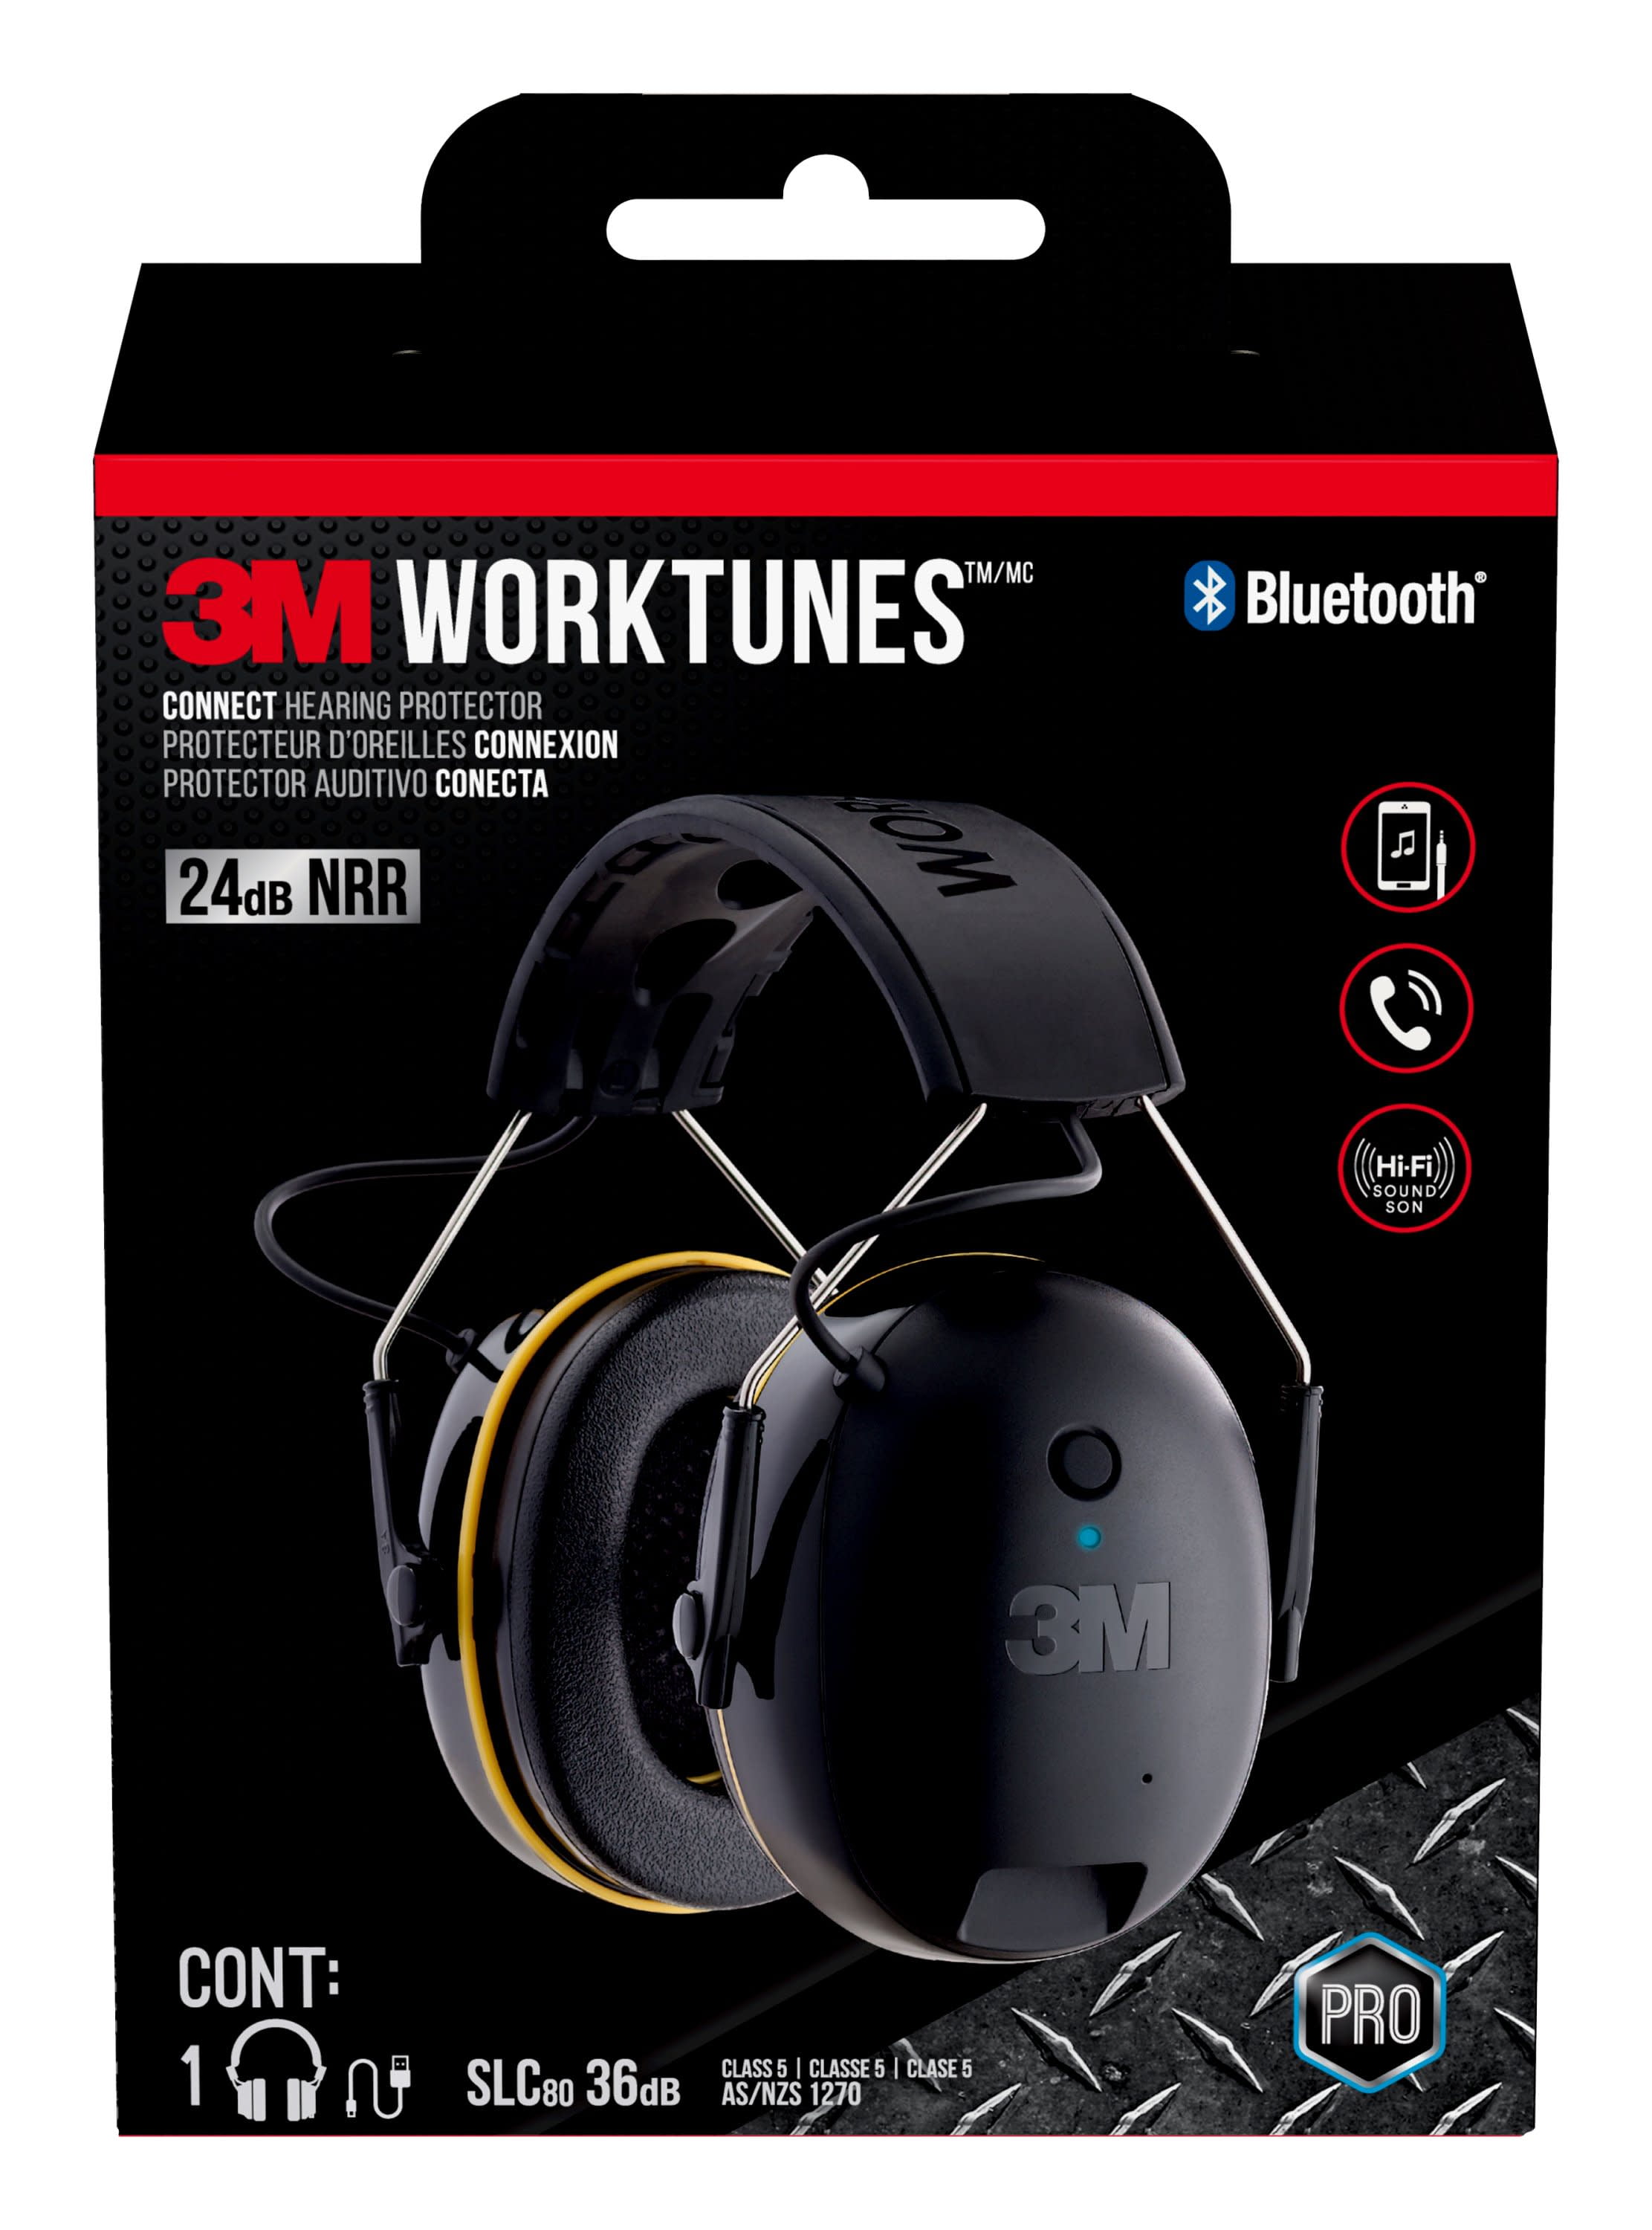 Hearing Protector 3M Worktunes Muff Headset HI-FI Sound Ear Connect Bluetooth 